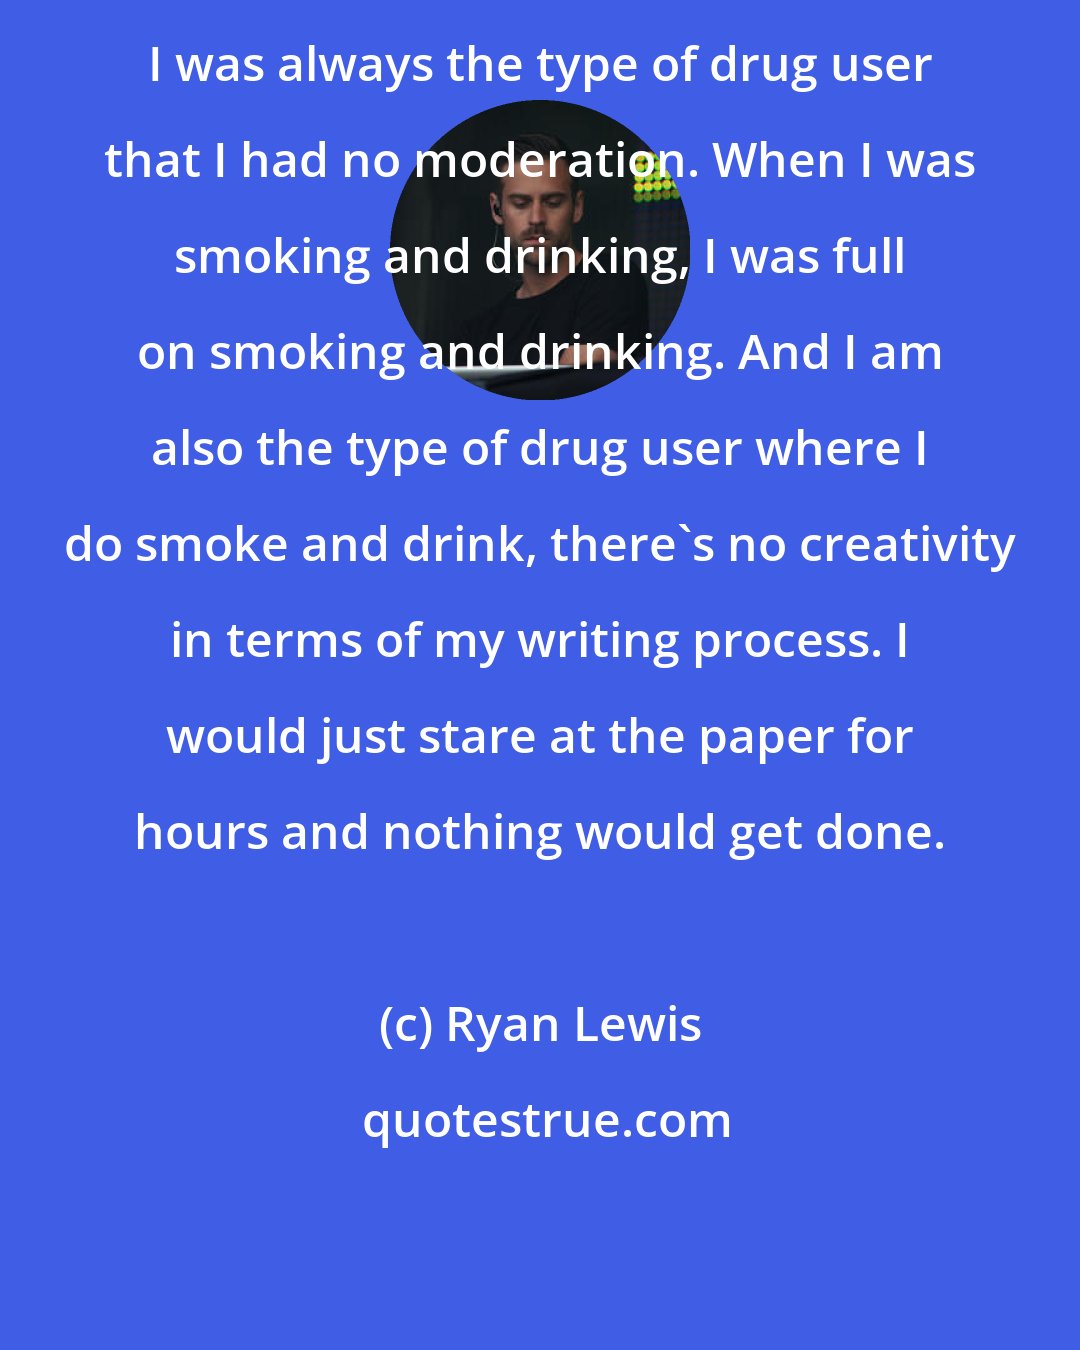 Ryan Lewis: I was always the type of drug user that I had no moderation. When I was smoking and drinking, I was full on smoking and drinking. And I am also the type of drug user where I do smoke and drink, there's no creativity in terms of my writing process. I would just stare at the paper for hours and nothing would get done.